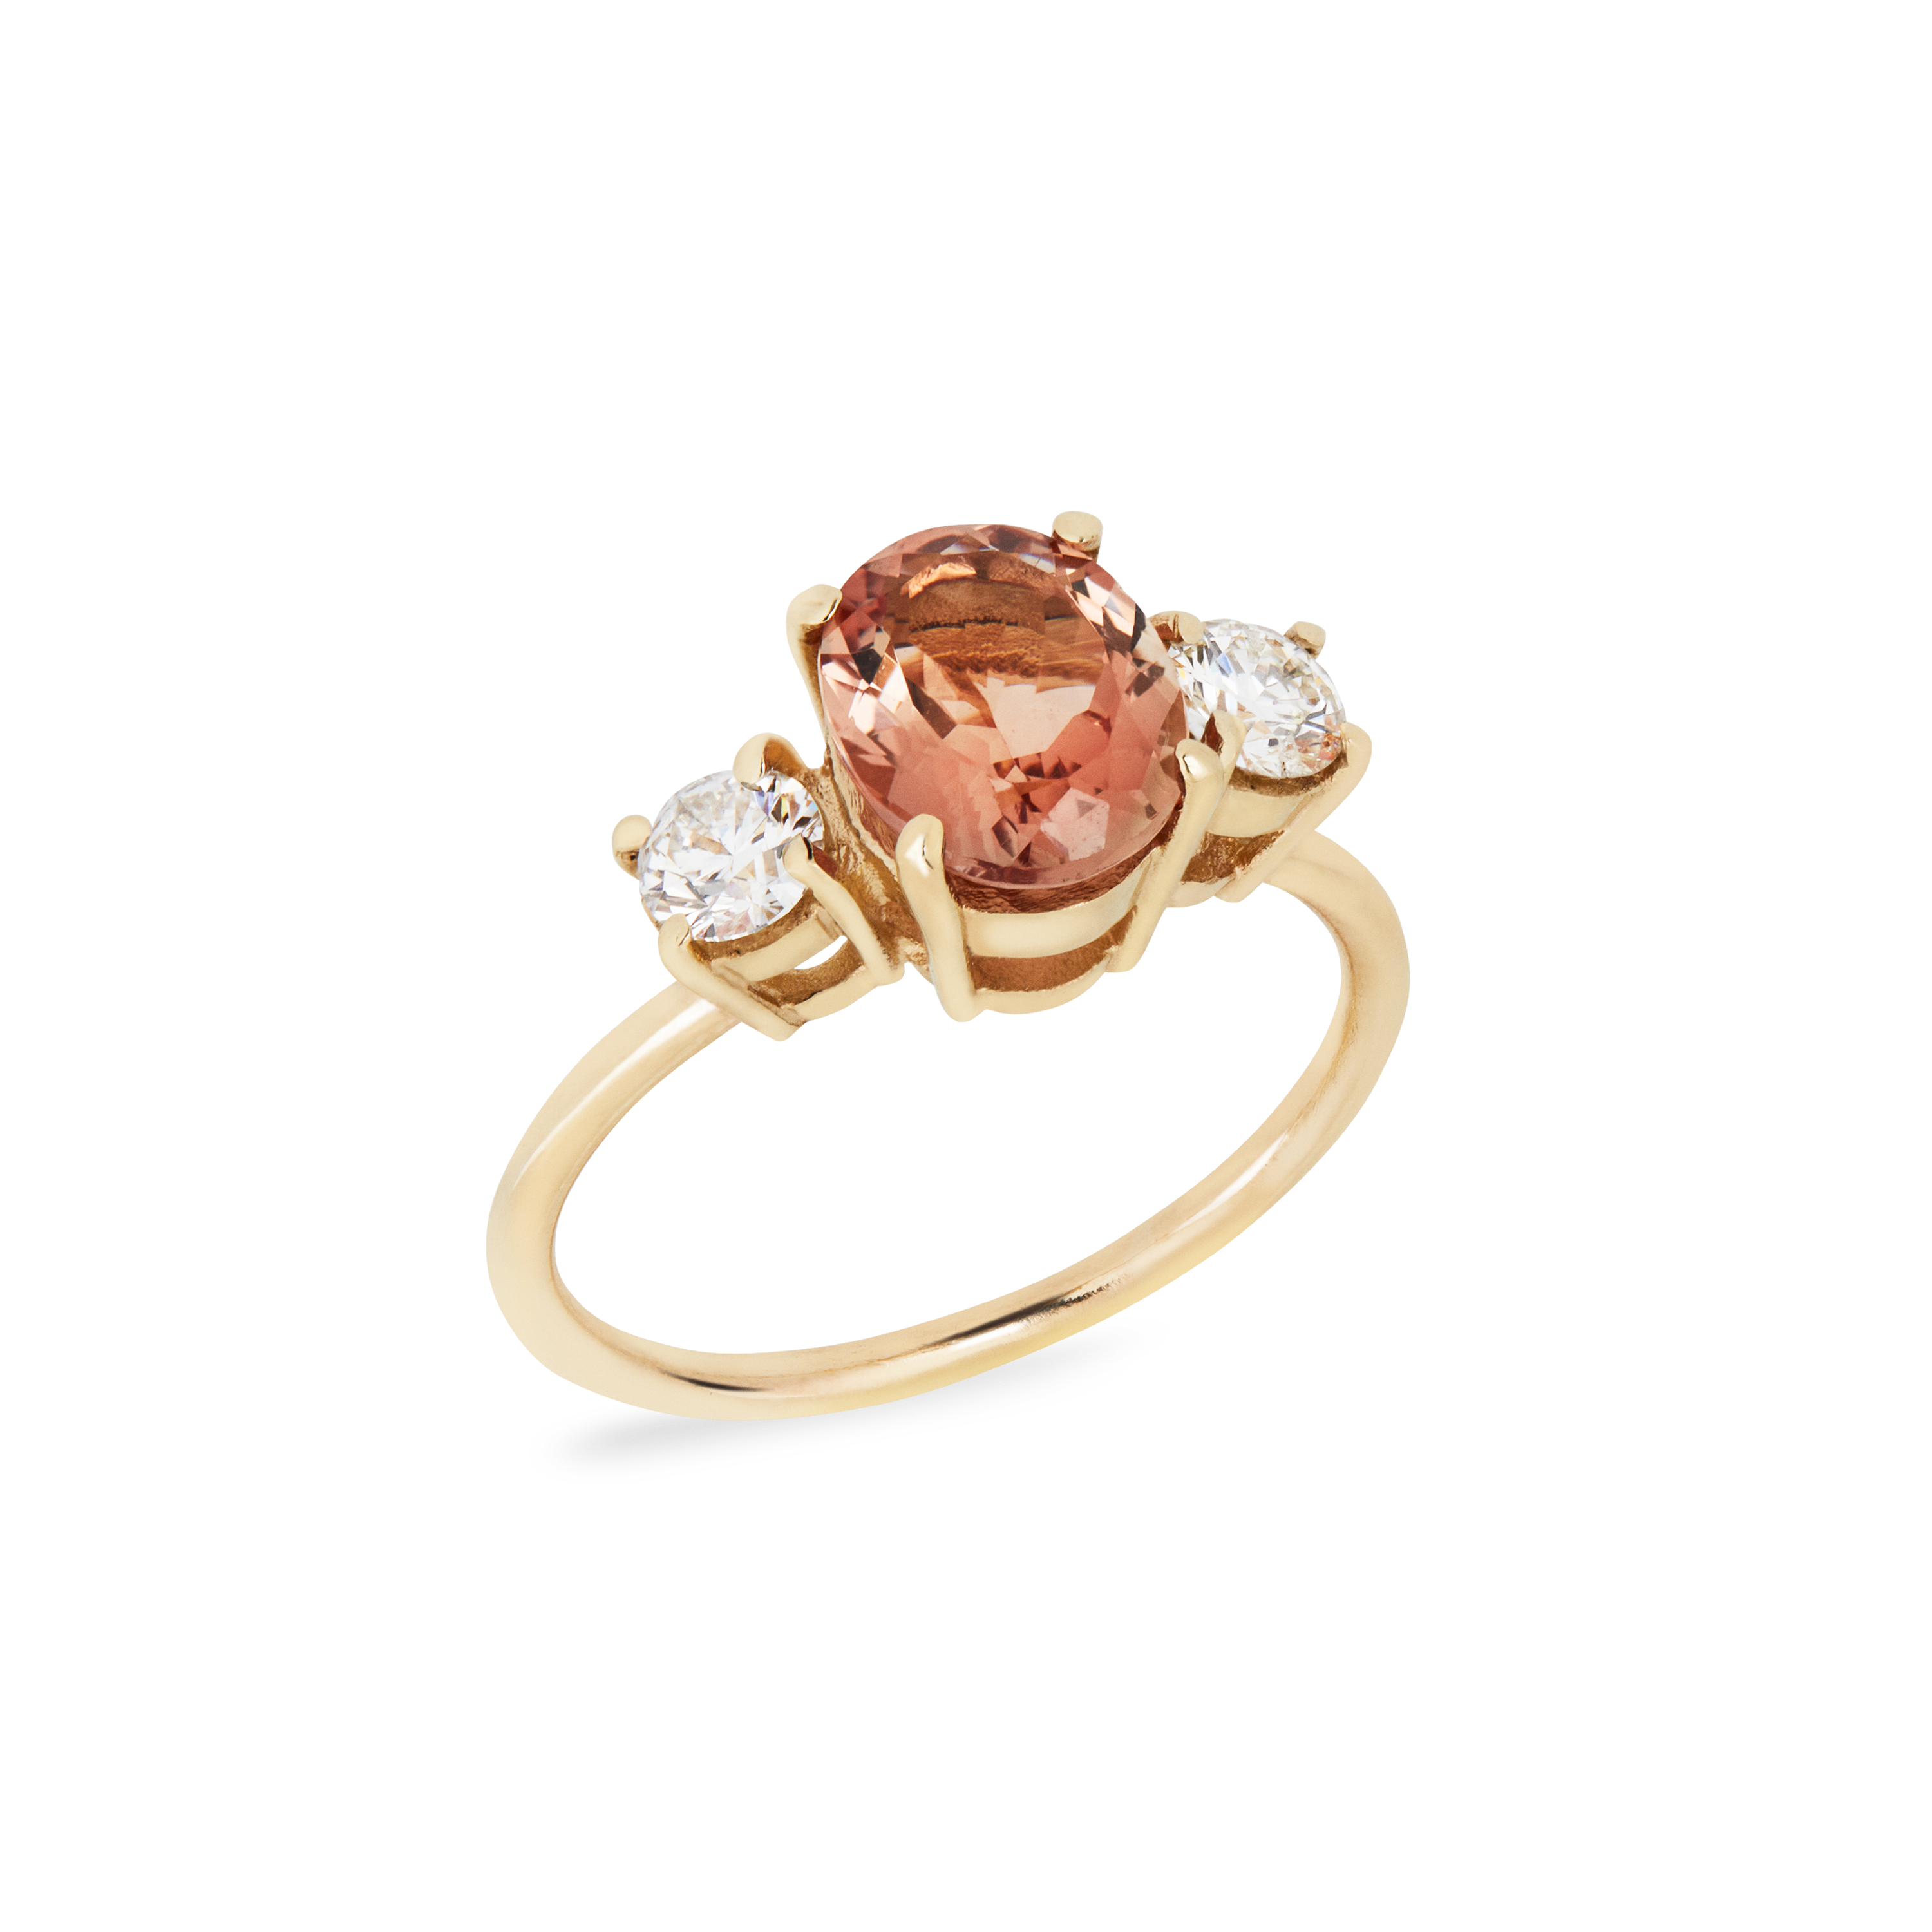 The Vivienne Ring